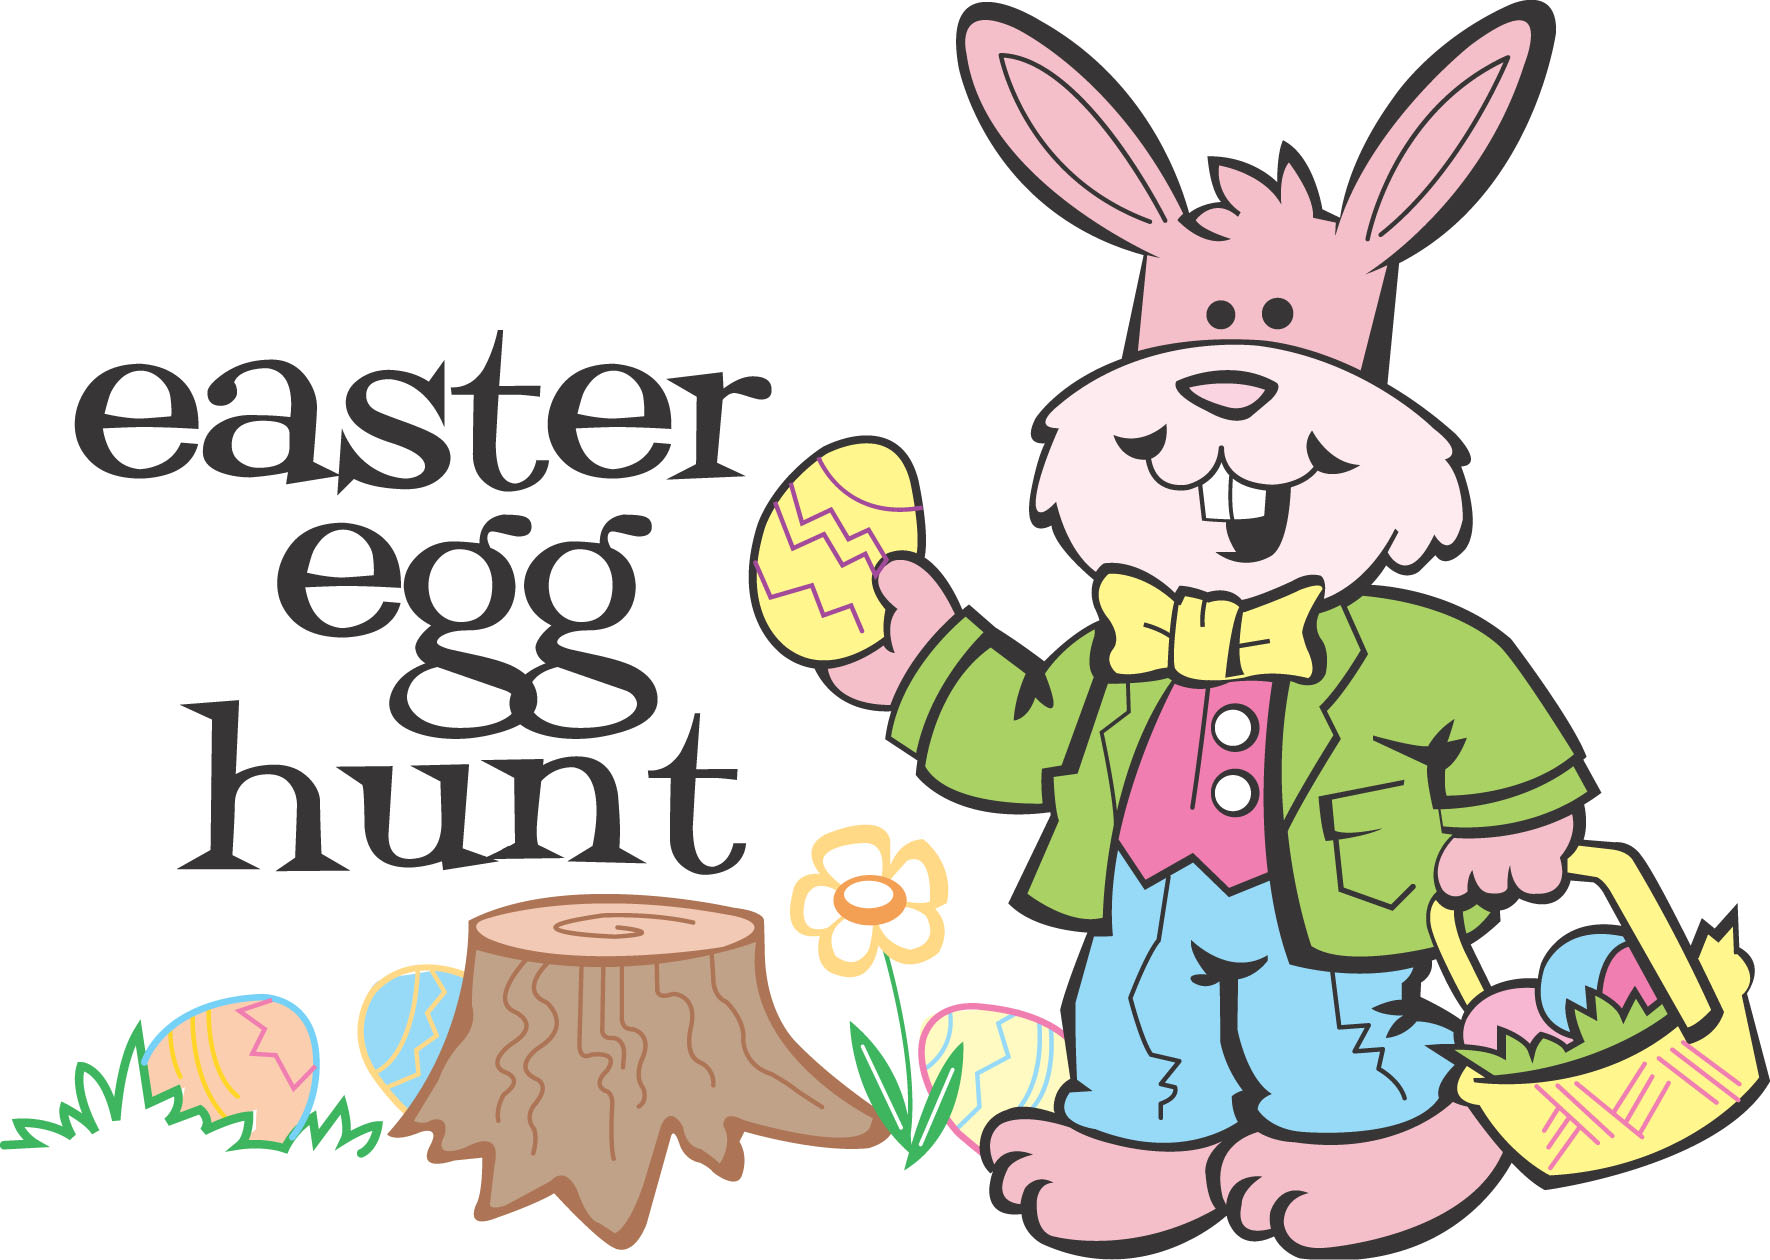 We Will Be Having An Easter Egg Hunt On Thursday April 2nd   Your    